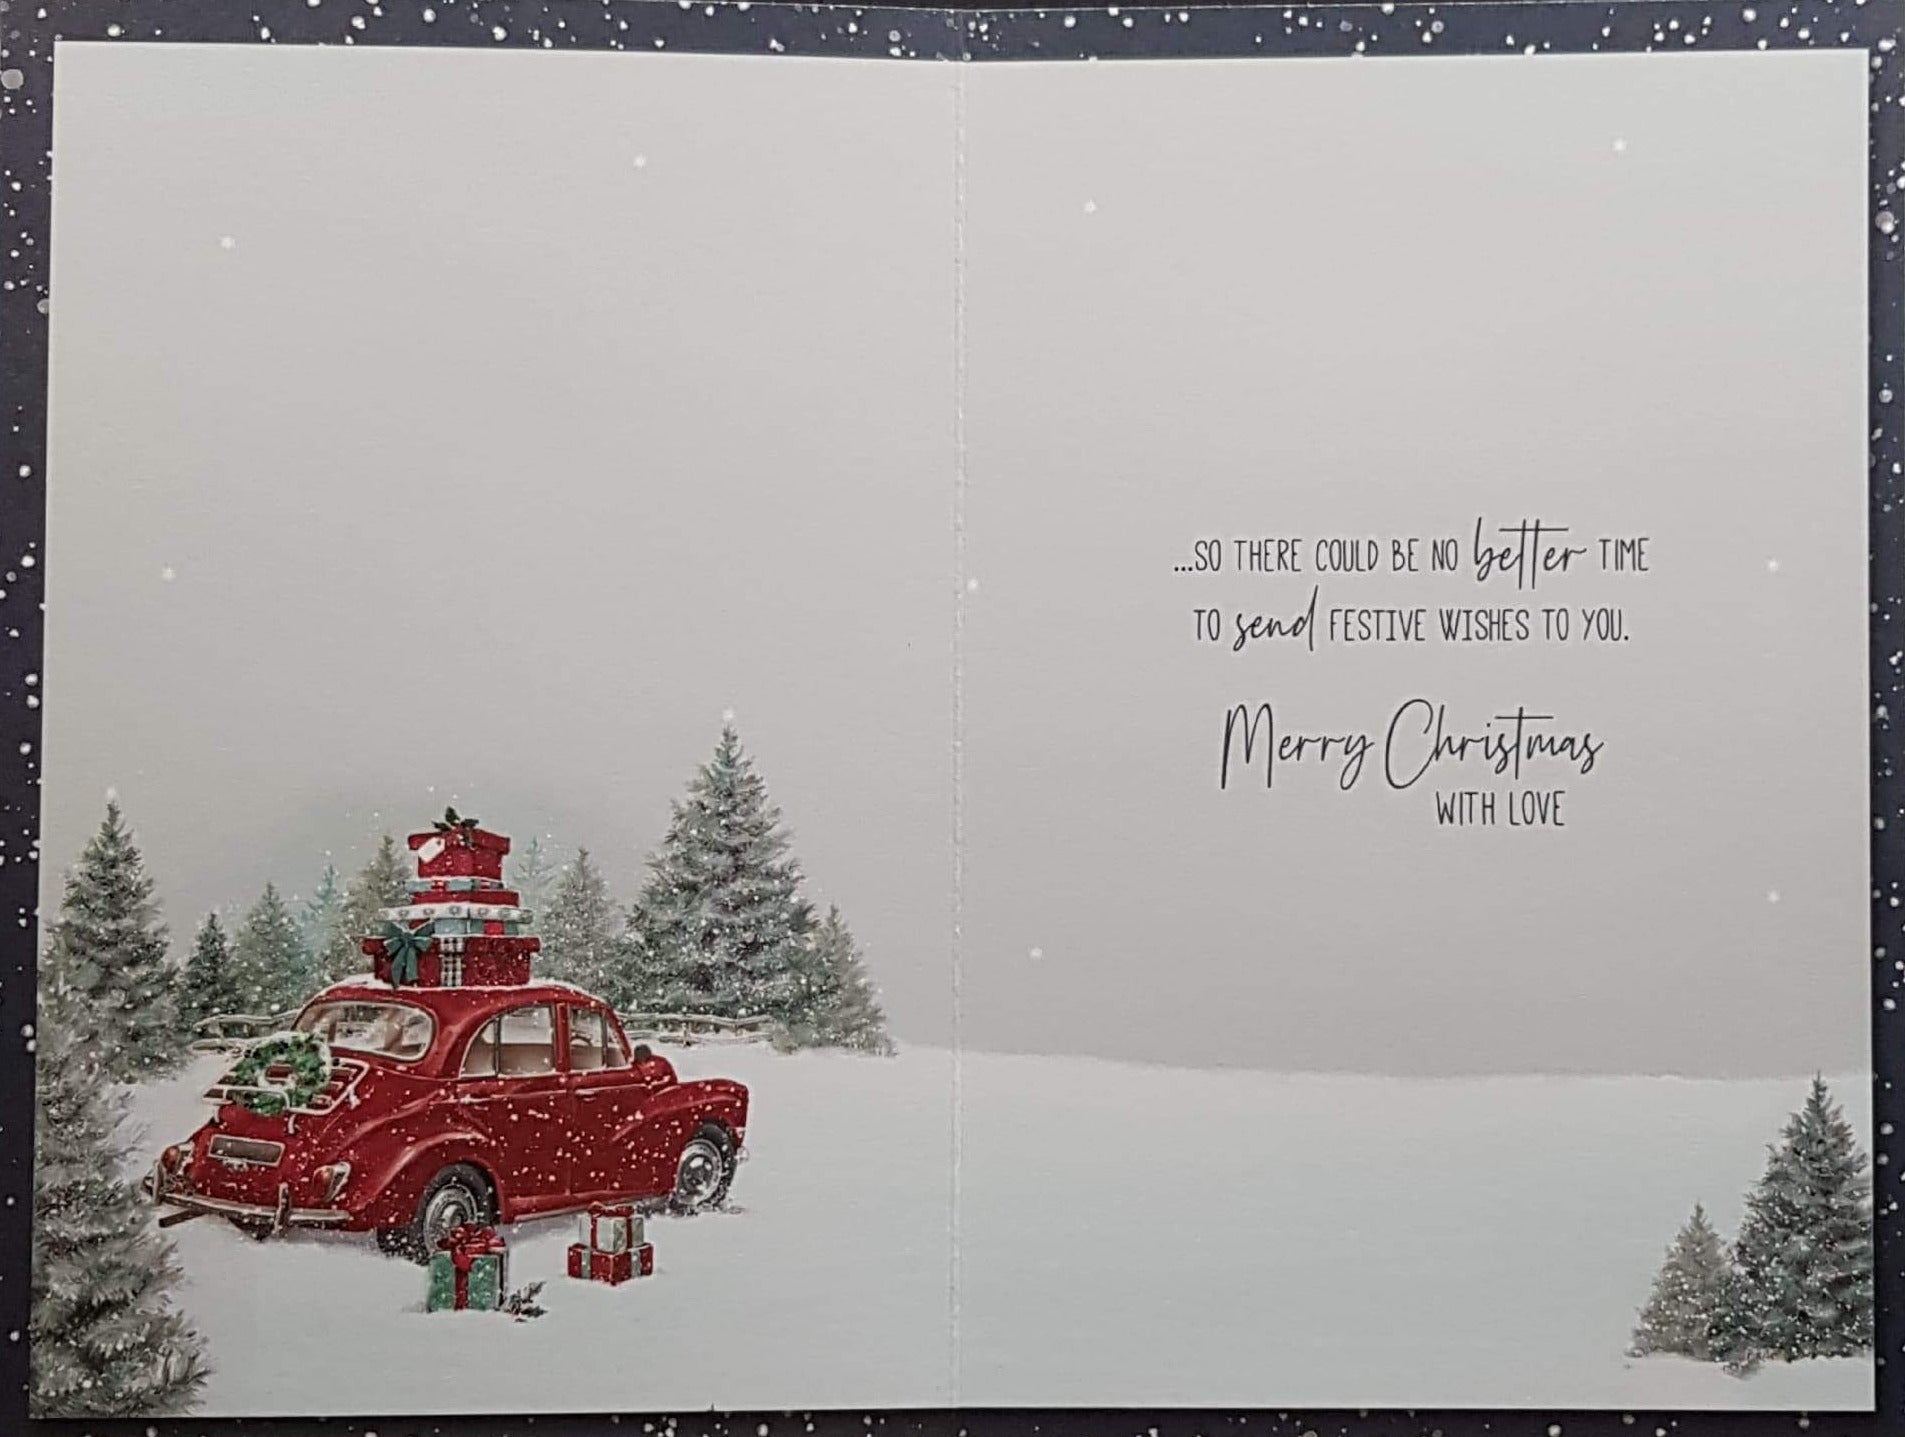 uncle christmas card